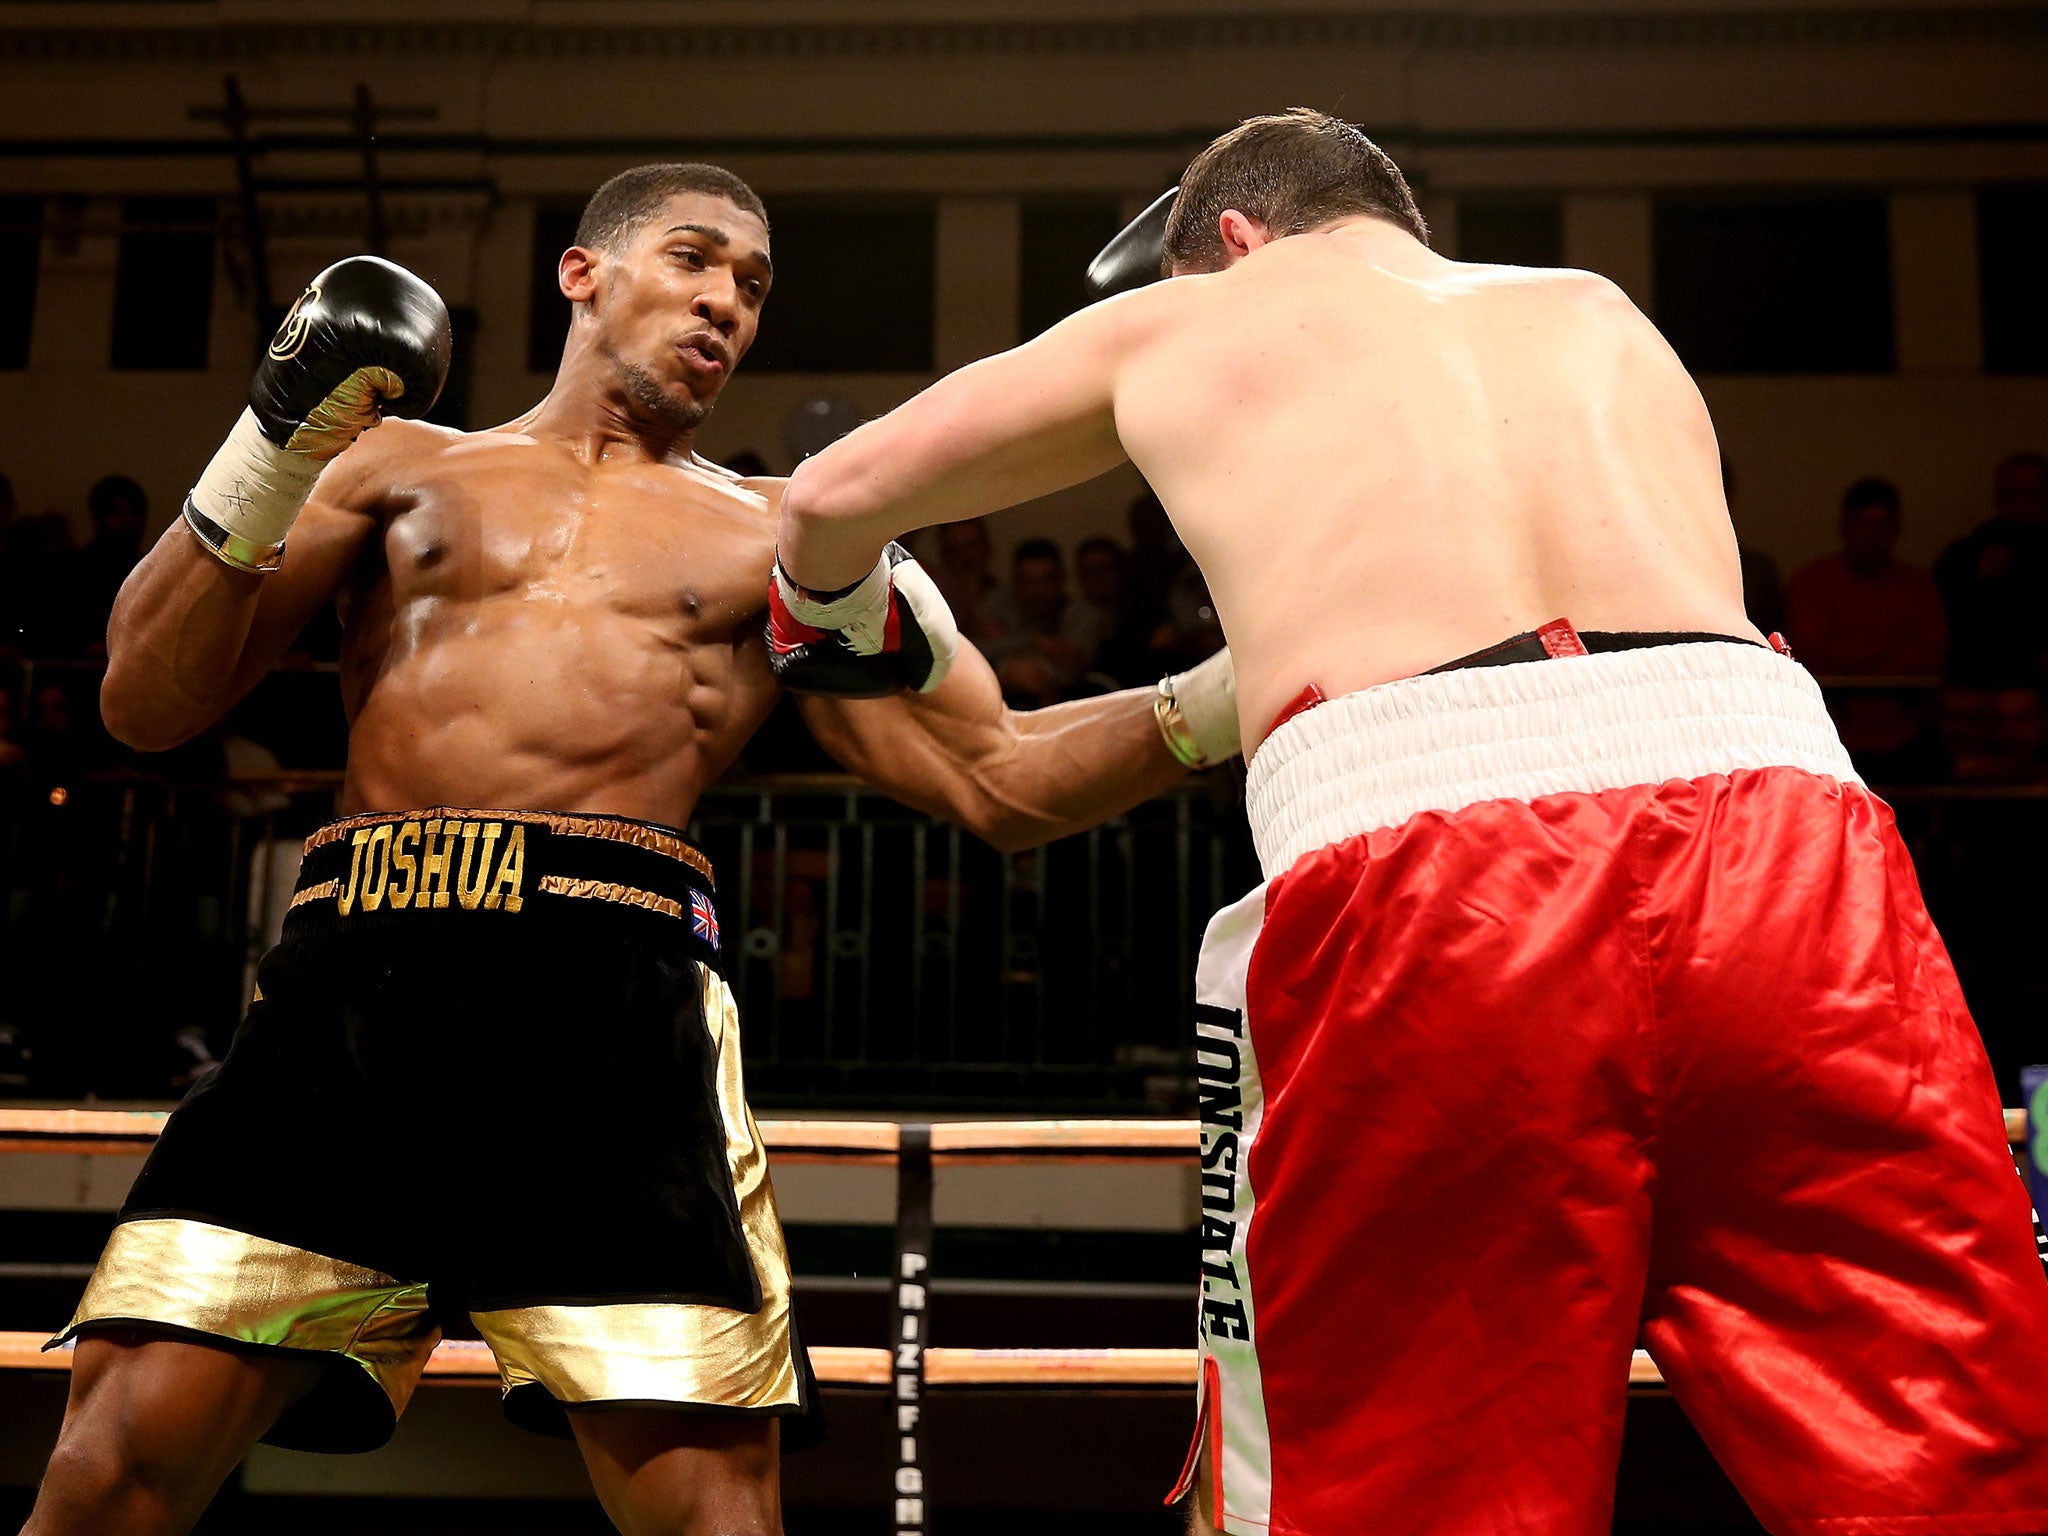 British heavyweight Anthony Joshua continued his unbeaten start to his professional boxing career